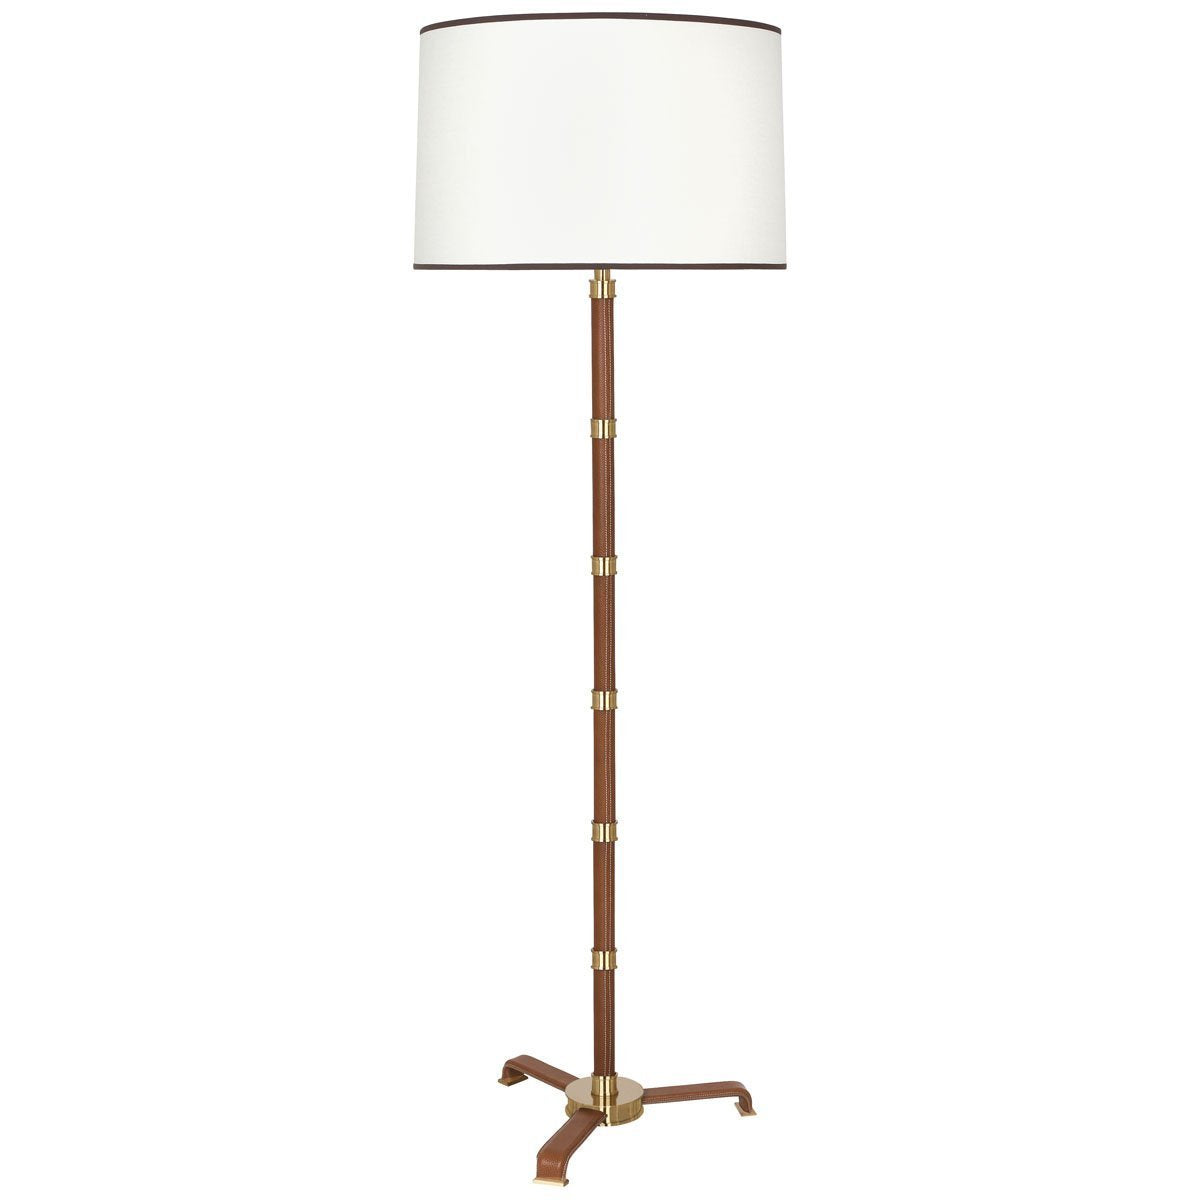 Voltaire Floor Lamp in Various Finishes design by Jonathan Adler